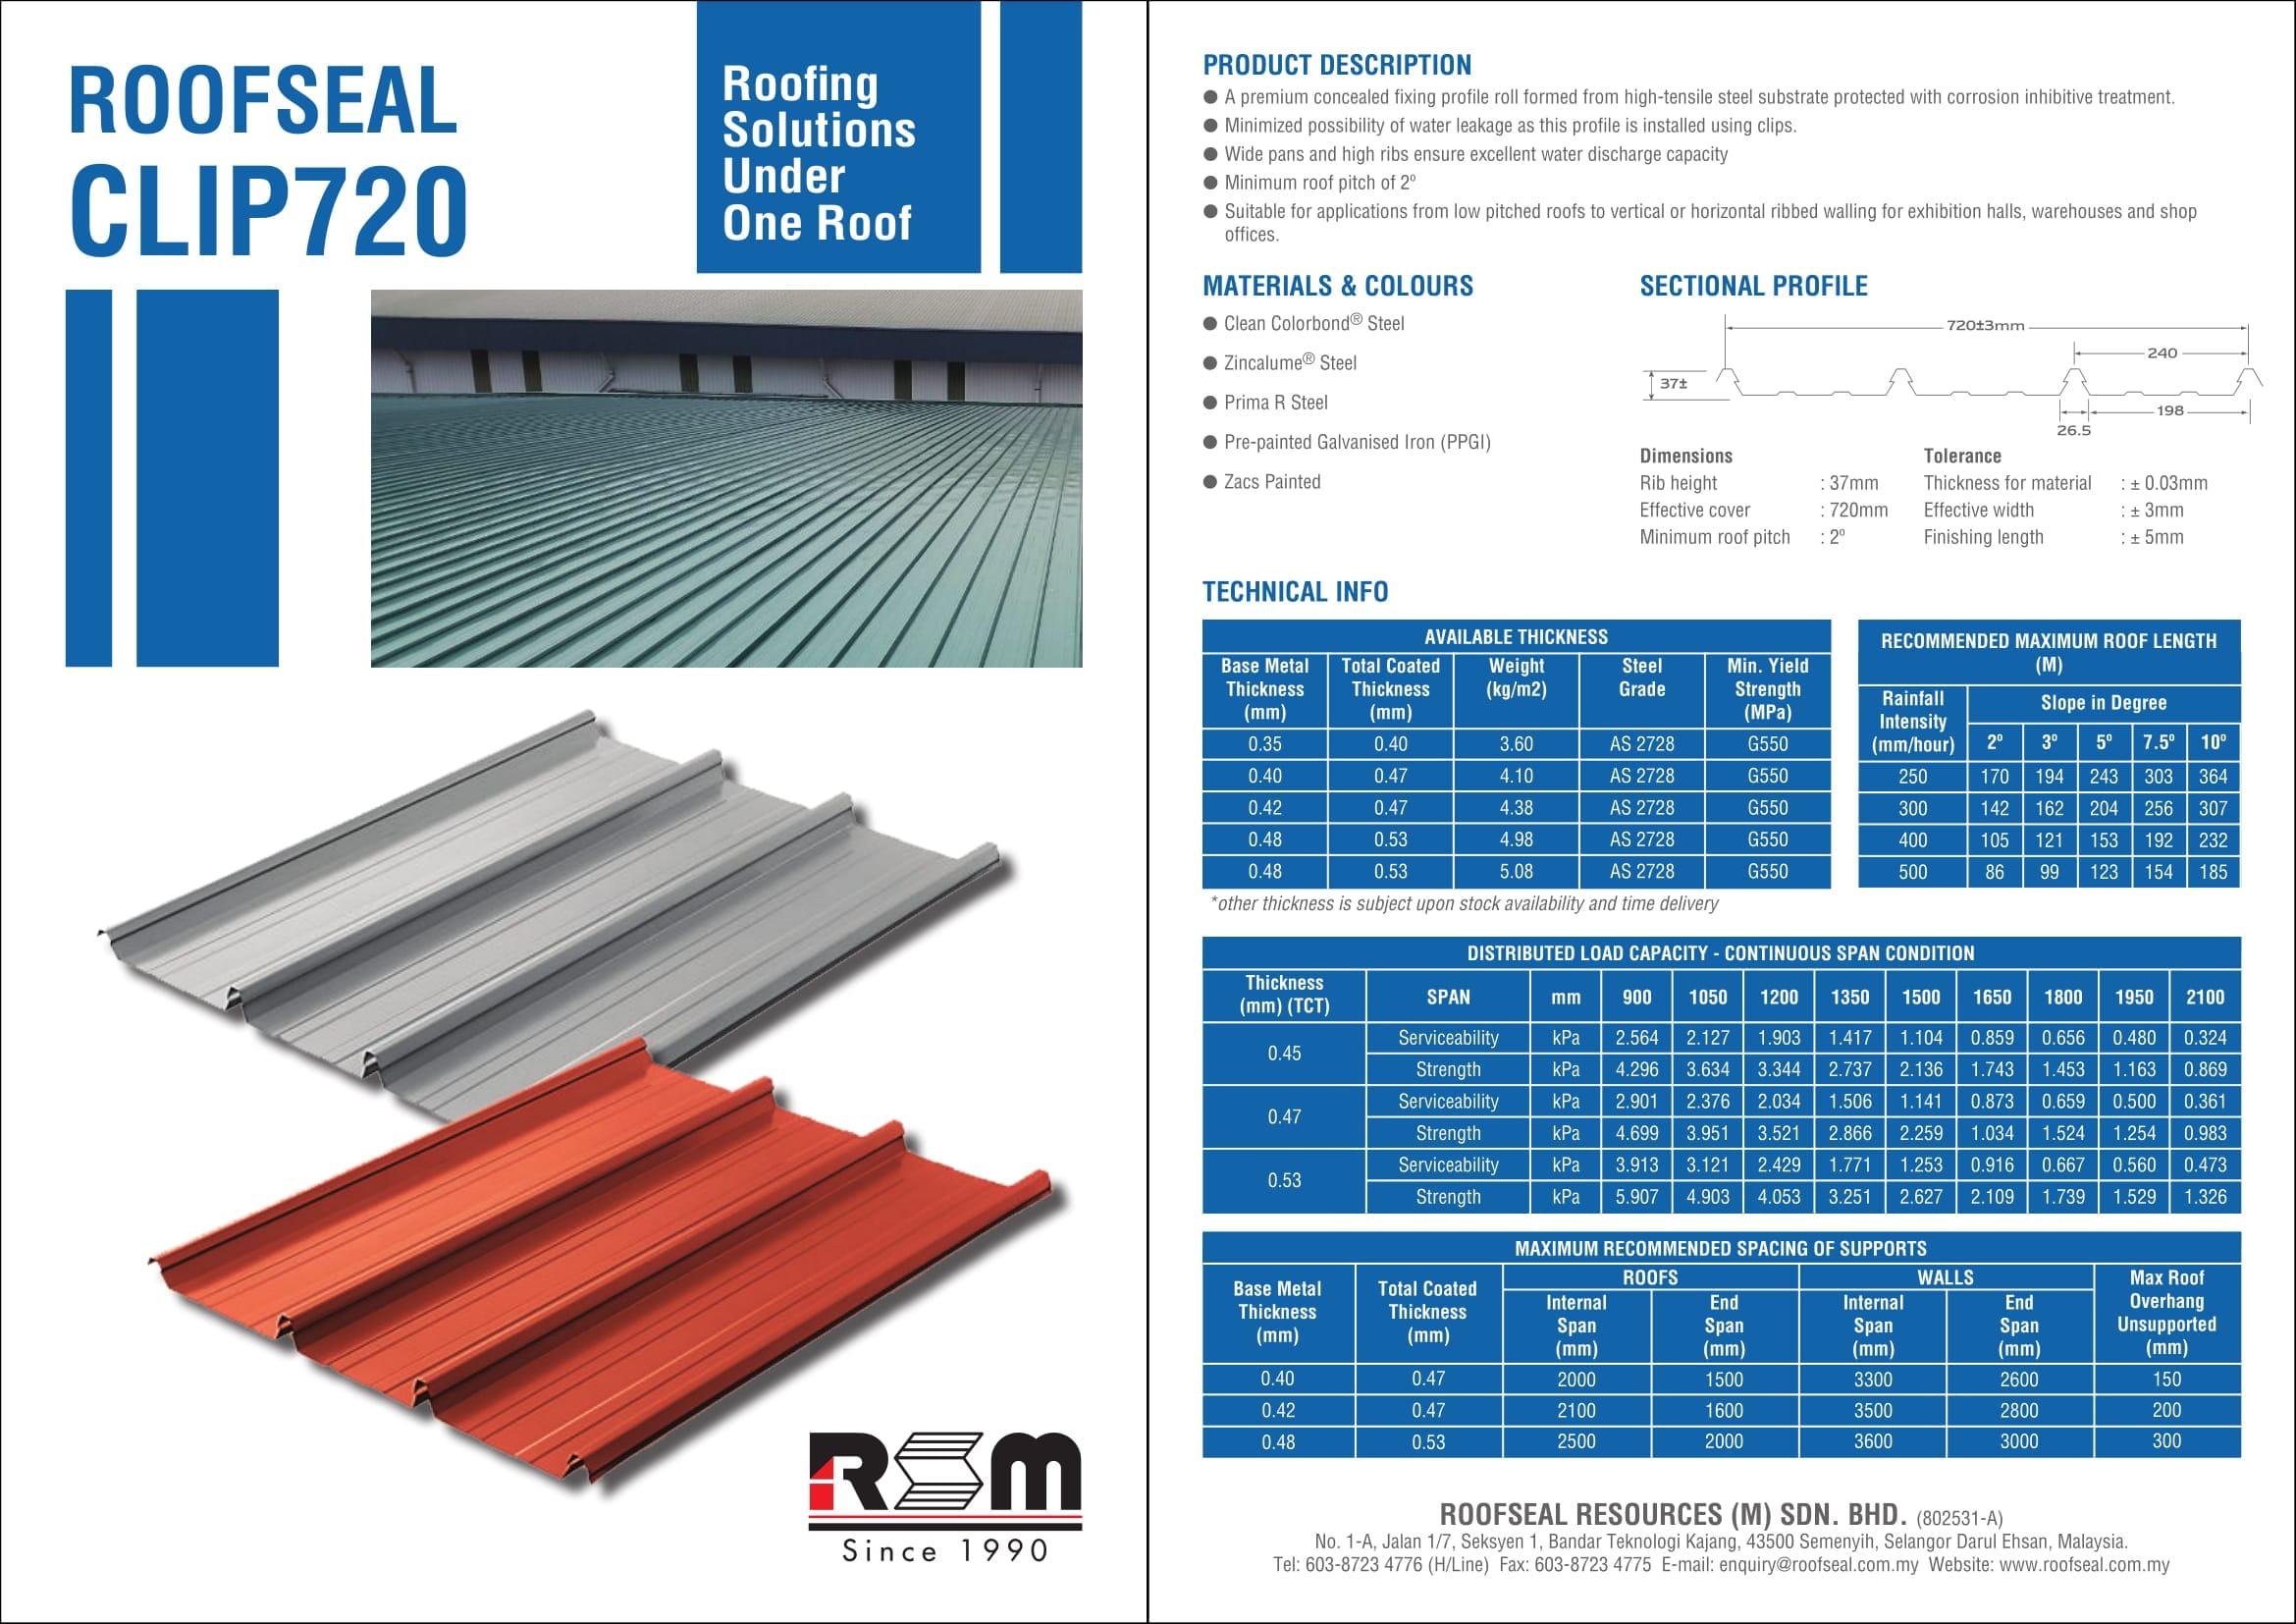 Roofseal Clip720 Metal Roof